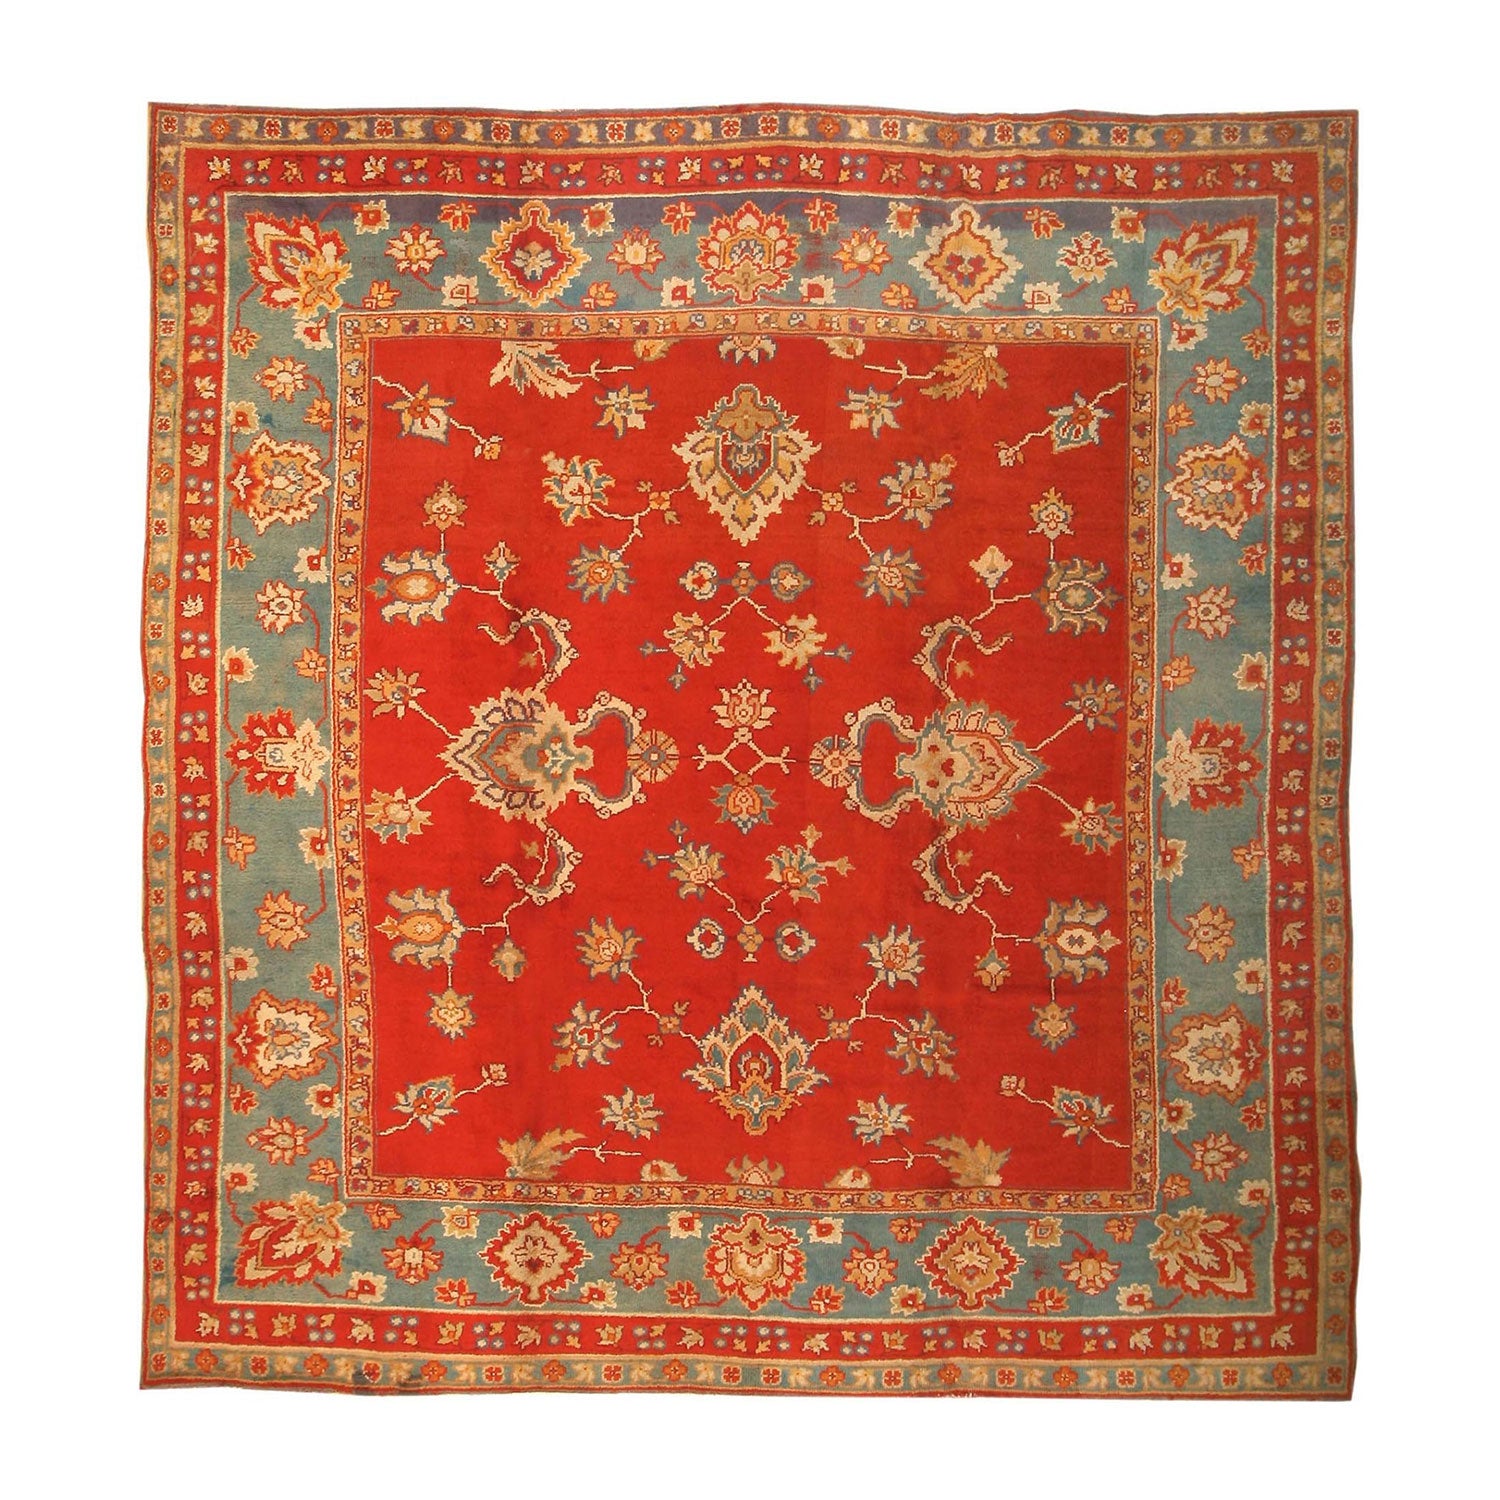 Intricately designed hand-knotted rug showcases rich red floral motifs and intricate patterns on a white background.